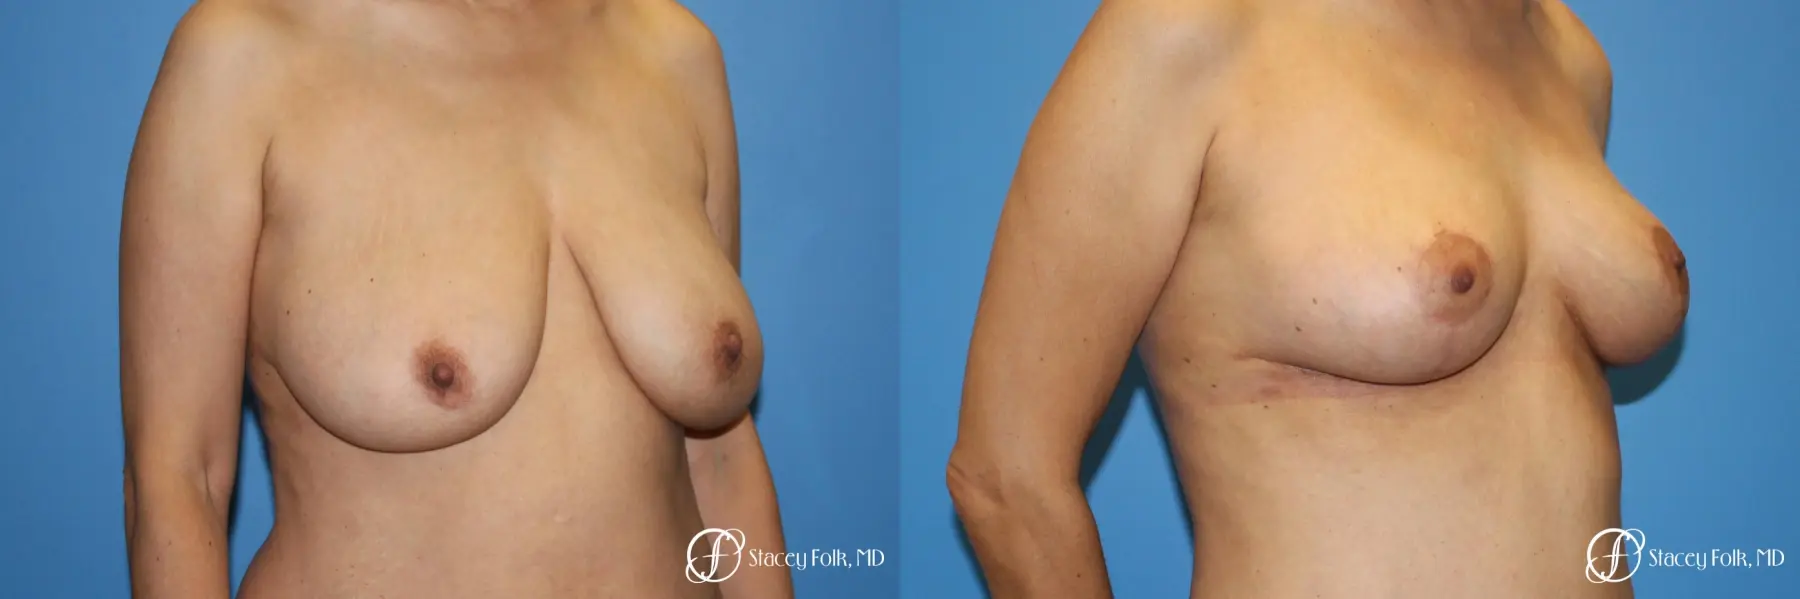 Denver Breast Lift - Mastopexy 7984 - Before and After 2